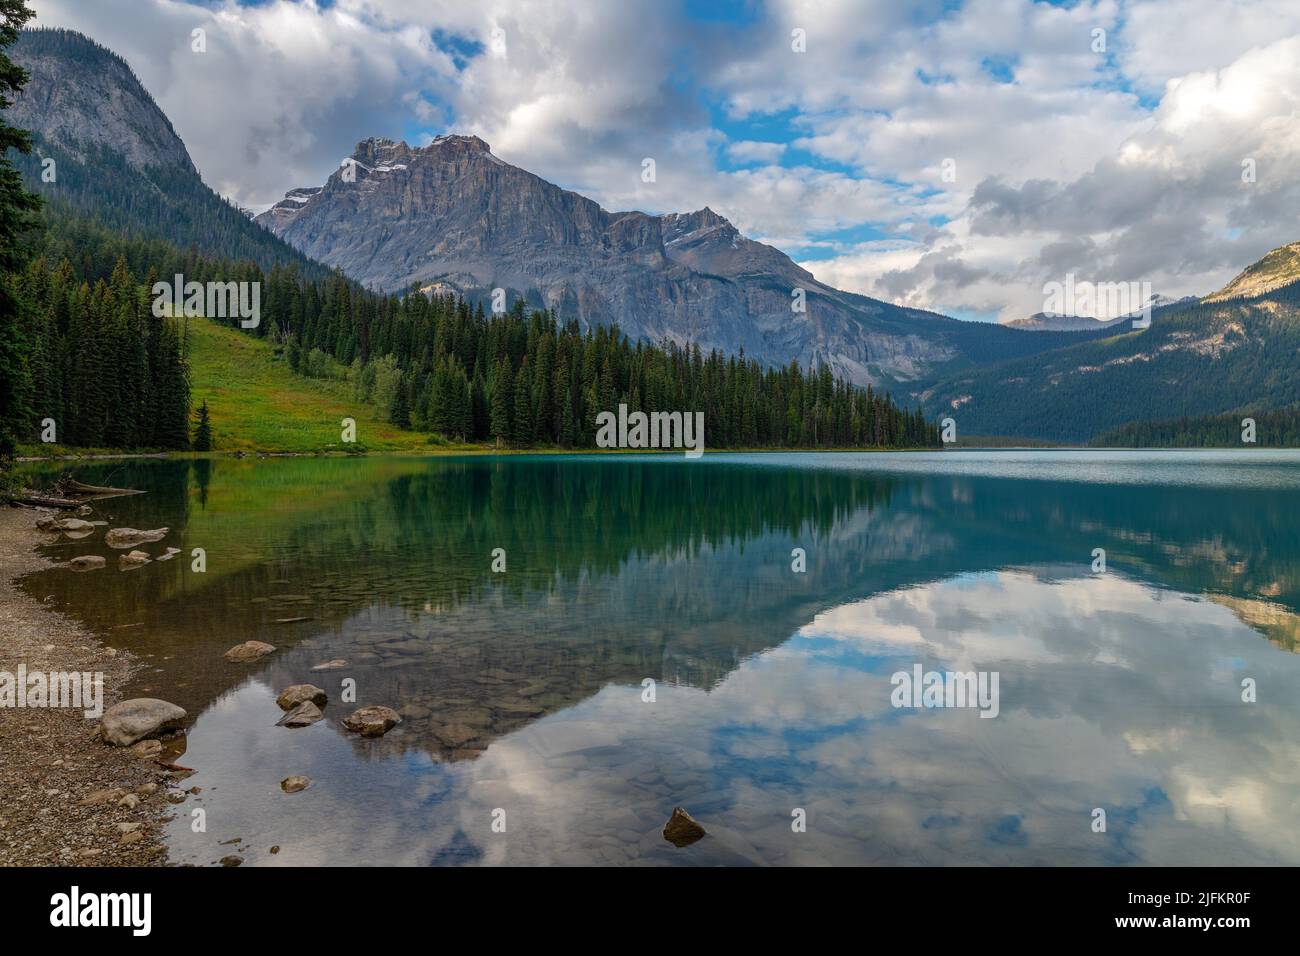 Reflecting mountains in the Emerald Lake in Yoho National Park, British Columbia, Canada. Stock Photo